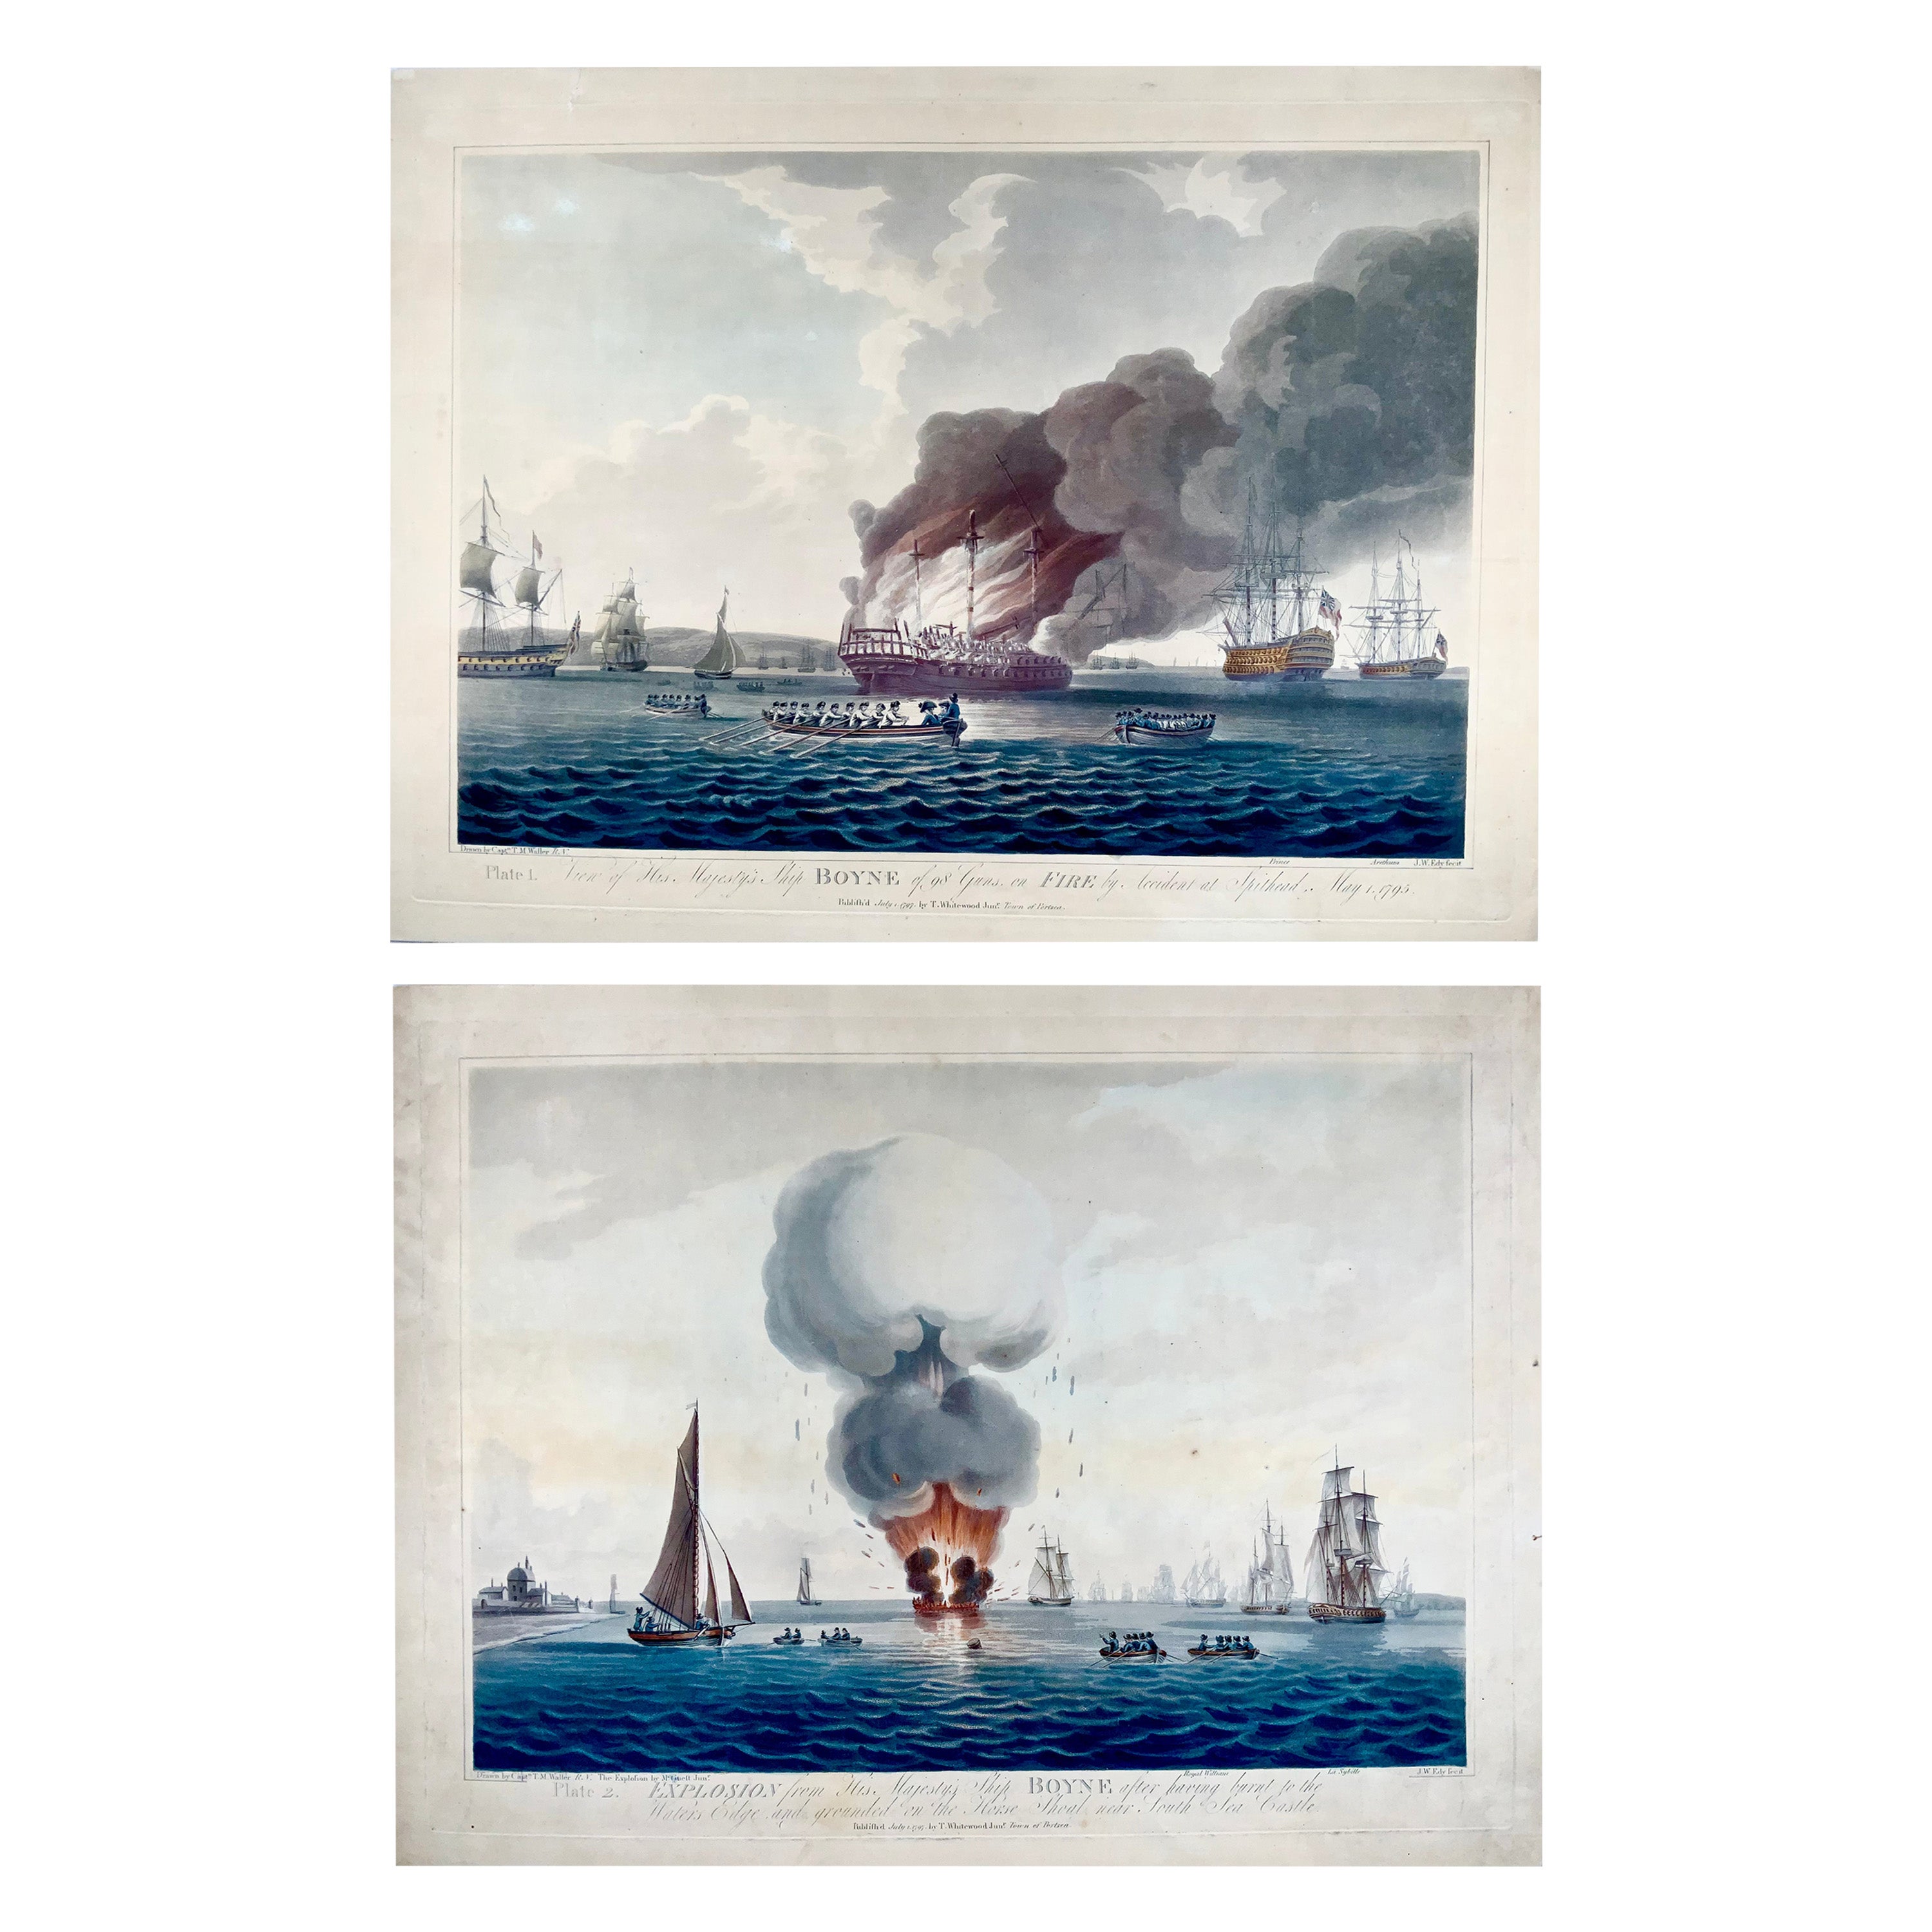 1797 Set of 2 Large Aquatints, Maritime, Explosion of the 'HMS' Boyne For Sale